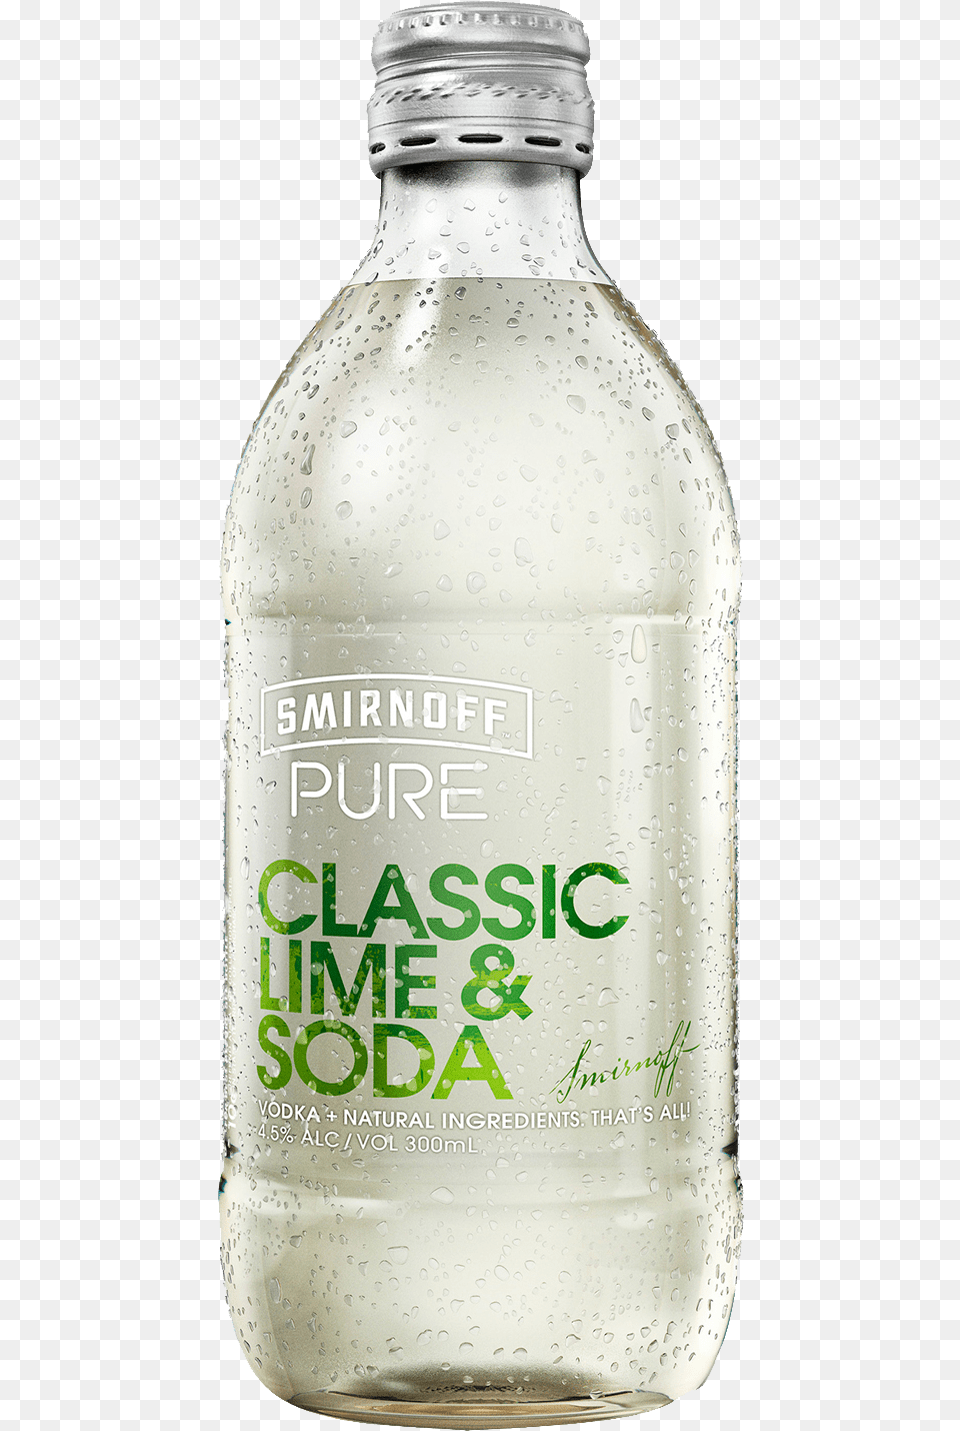 Smirnoff Pure Classic Lime Amp Soda Bottles 300ml Smirnoff Pure Passionfruit Lime Amp Soda, Beverage, Milk, Alcohol, Gin Free Png Download